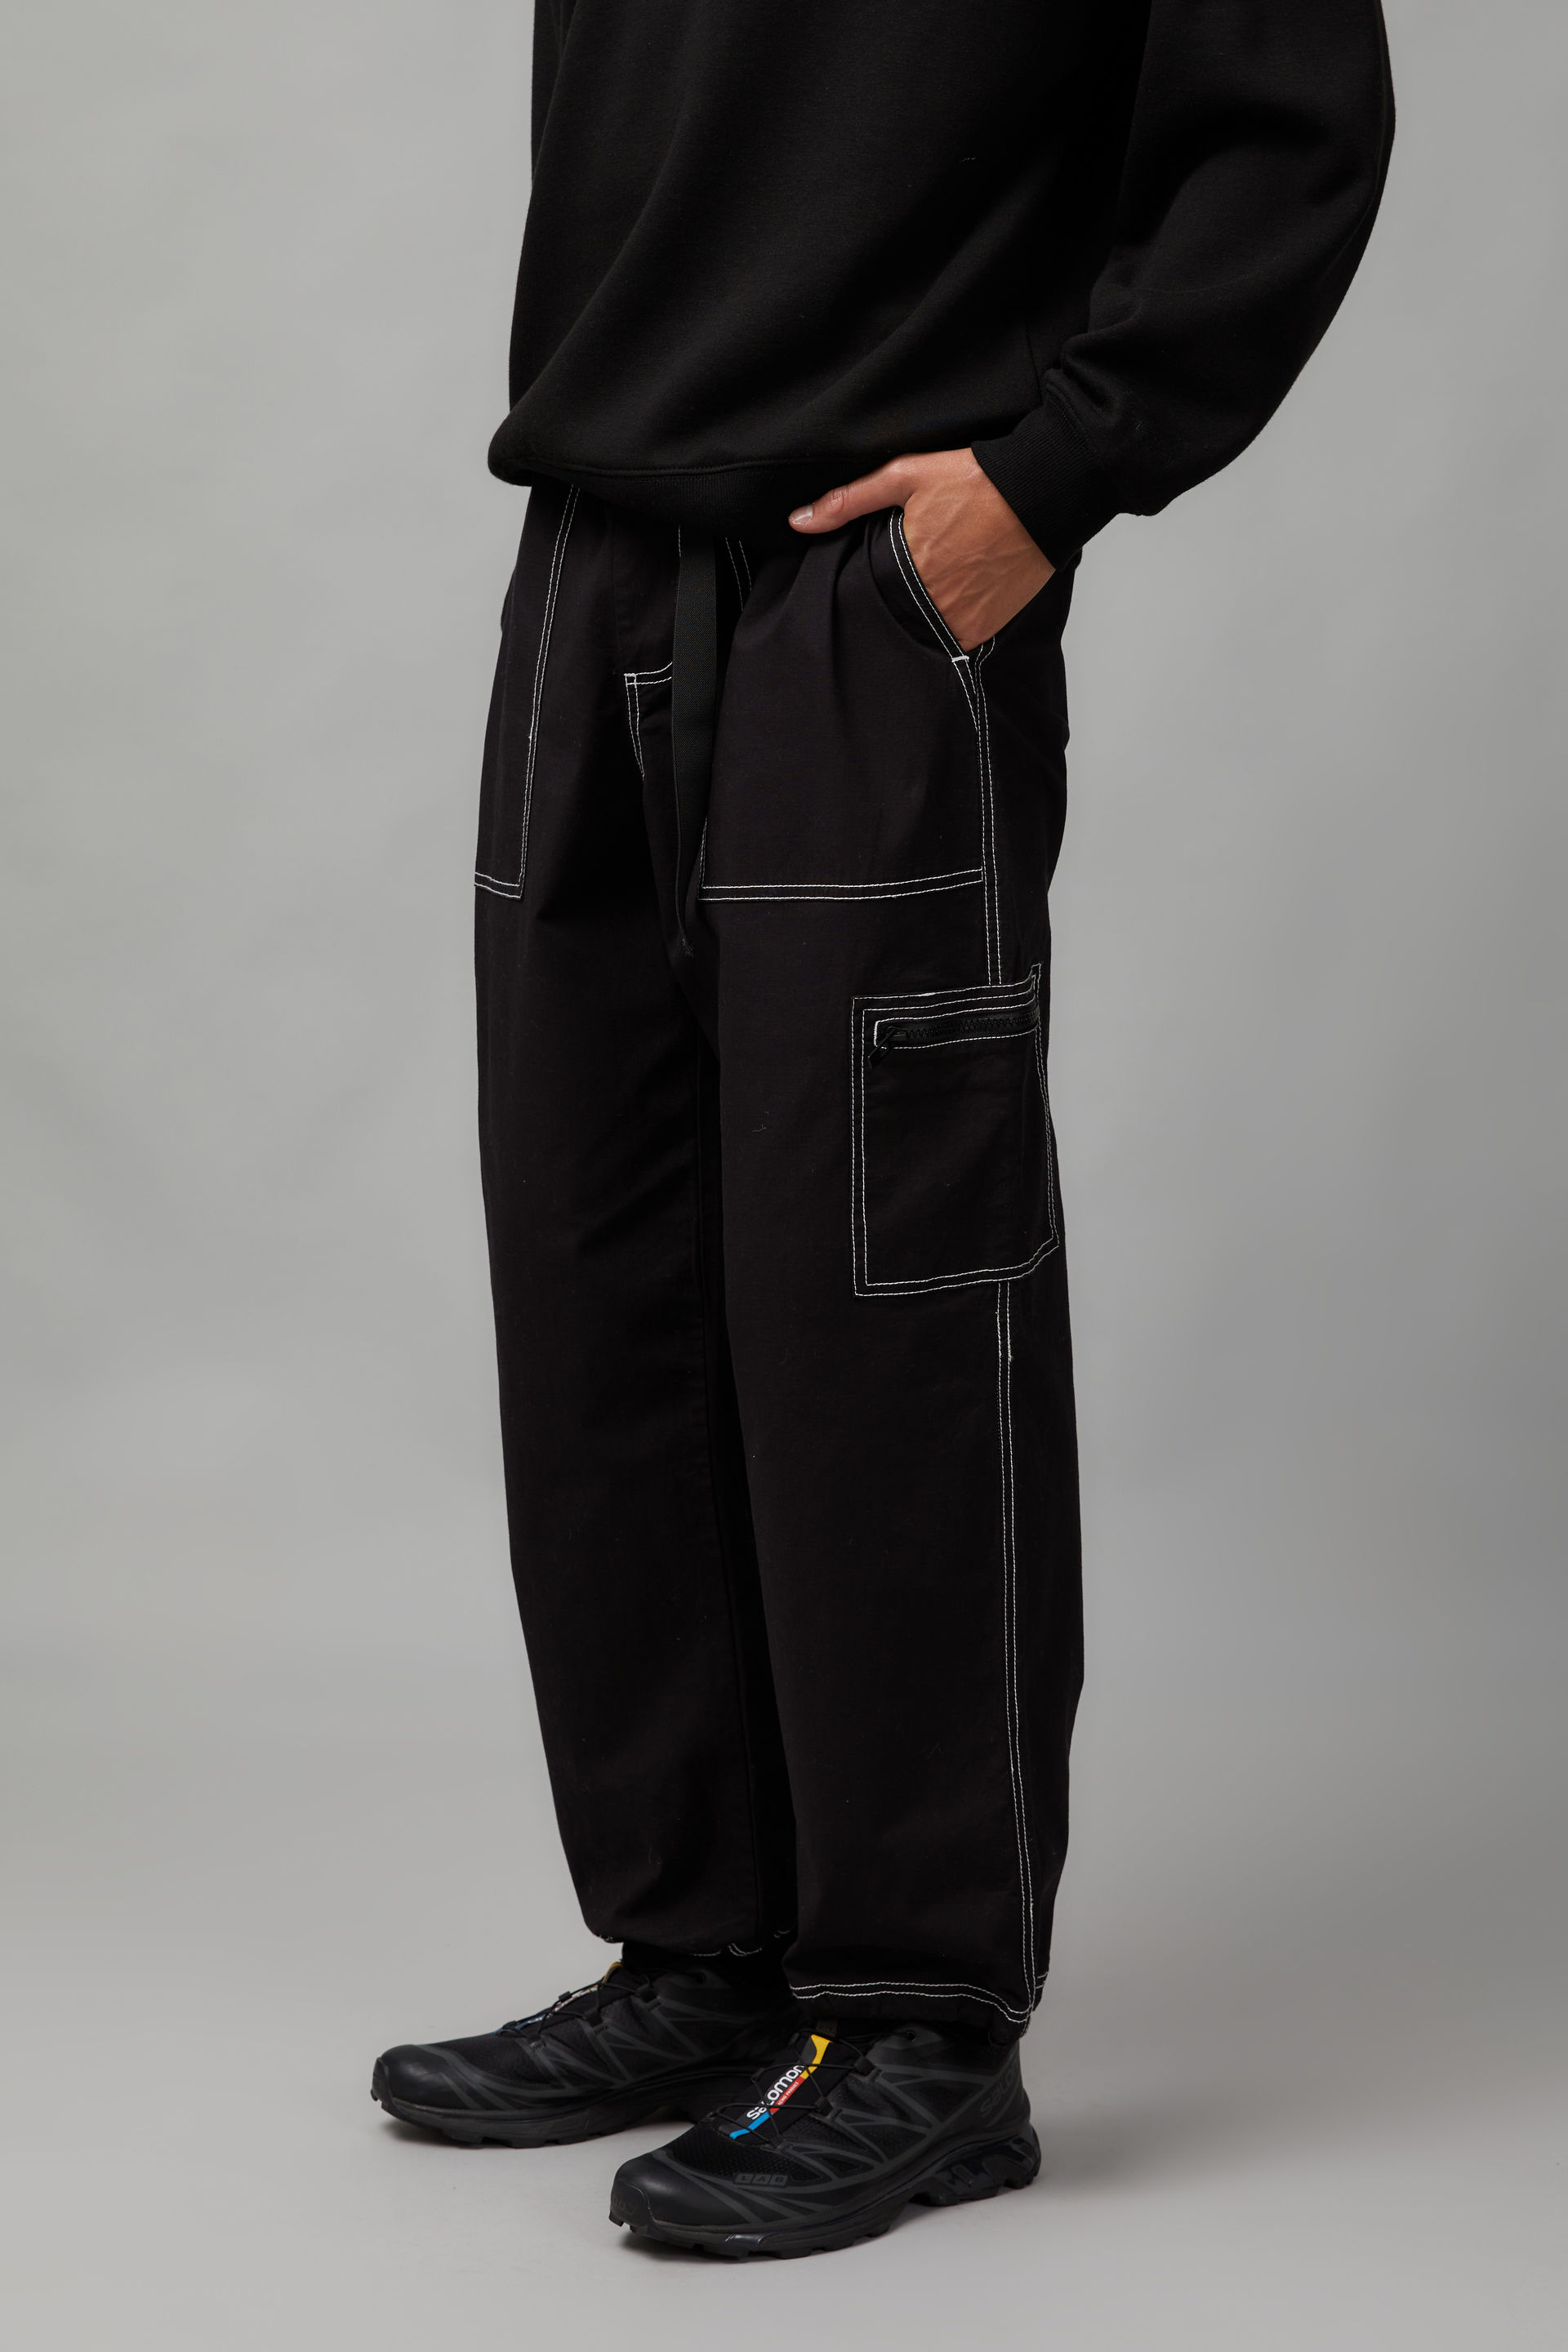 RELAXED FIT UTILITY PANTS - Black